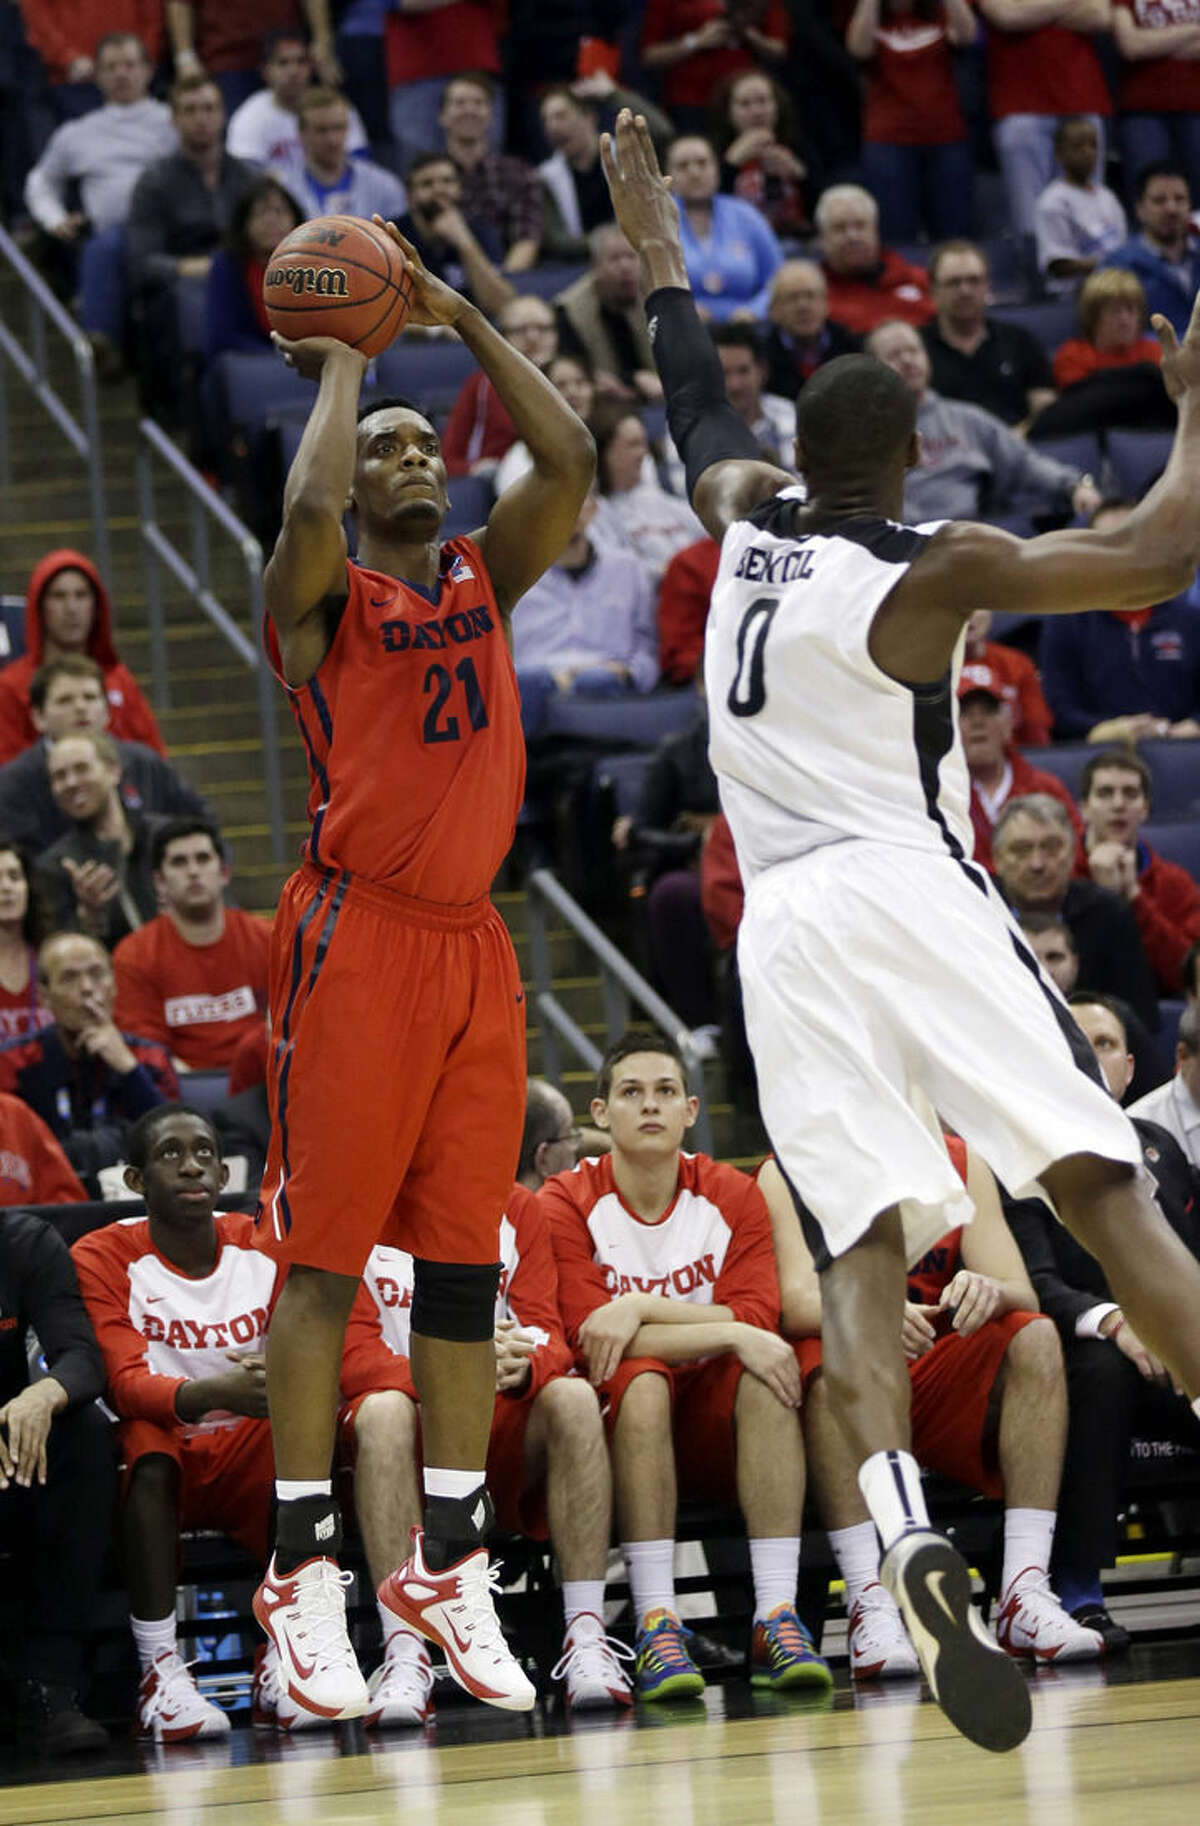 Dayton's Dyshawn Pierre (21) shoots over Providence's Ben Bentil (0) in the second half of an NCAA tournament college basketball game in the Round of 64 in Columbus, Ohio, Saturday, March 21, 2015. (AP Photo/Tony Dejak)